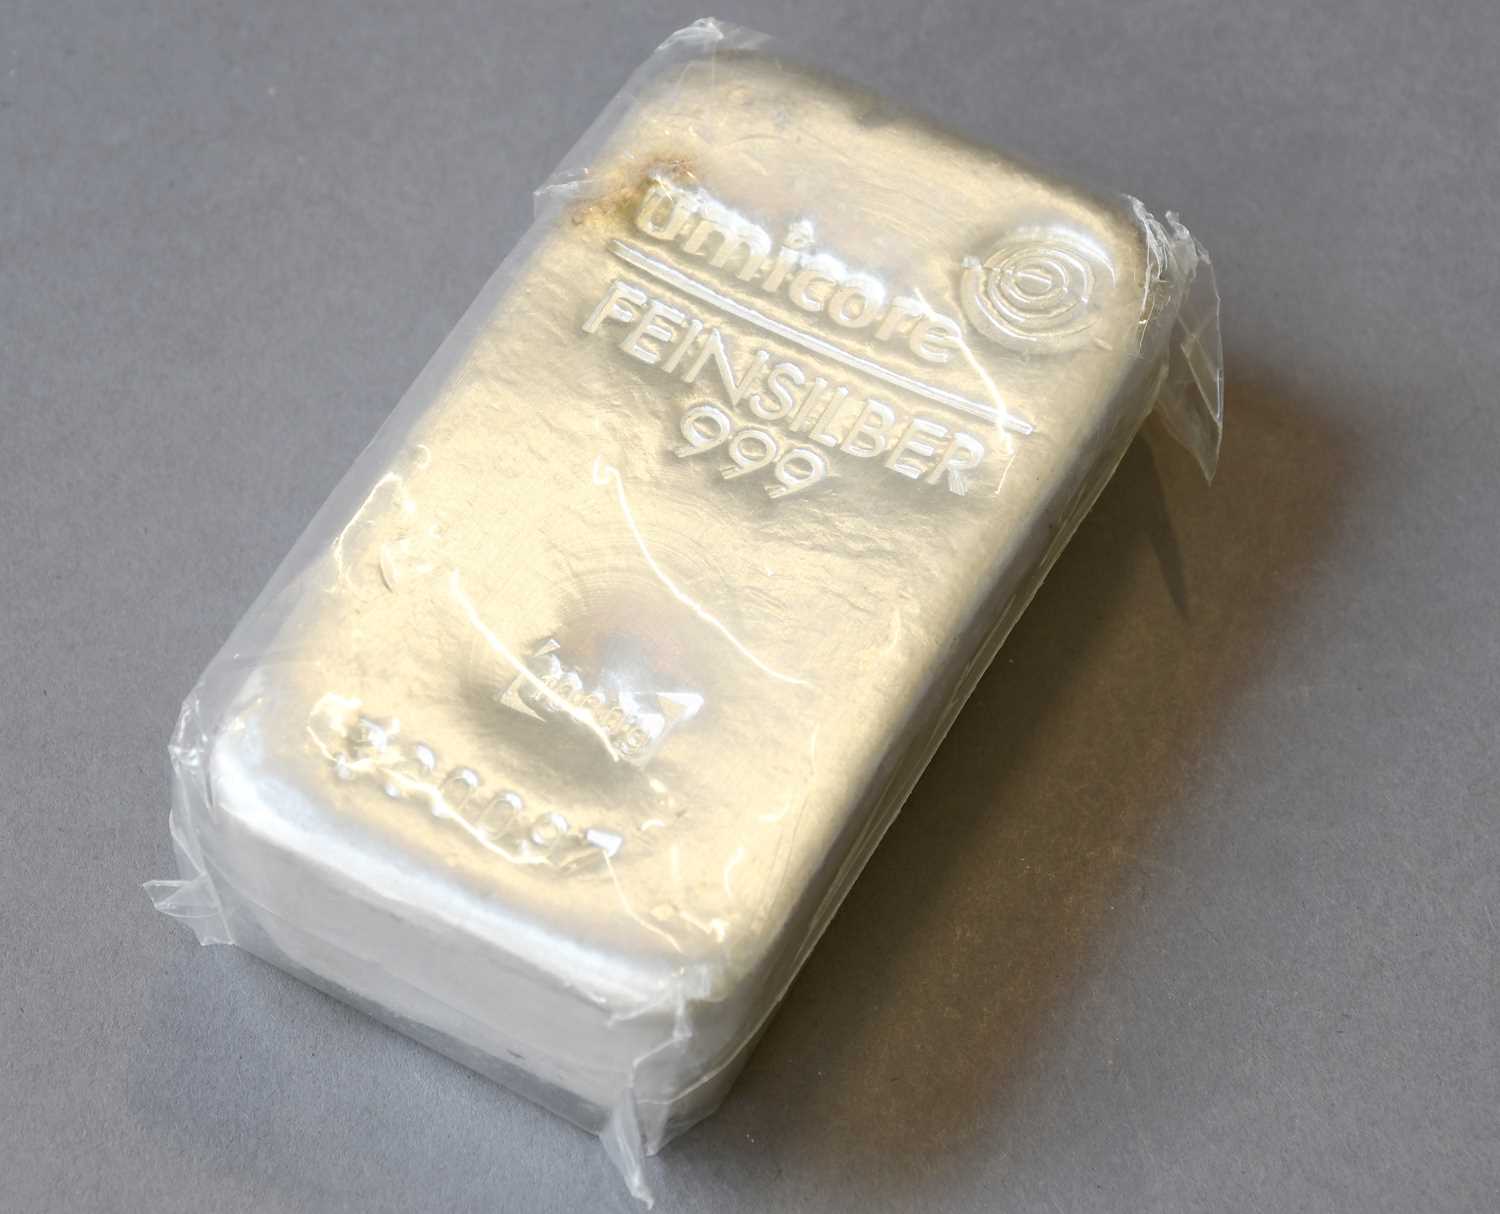 Lot 117 - A Silver Ingot, Stamped 'Umicore Feinsilber...